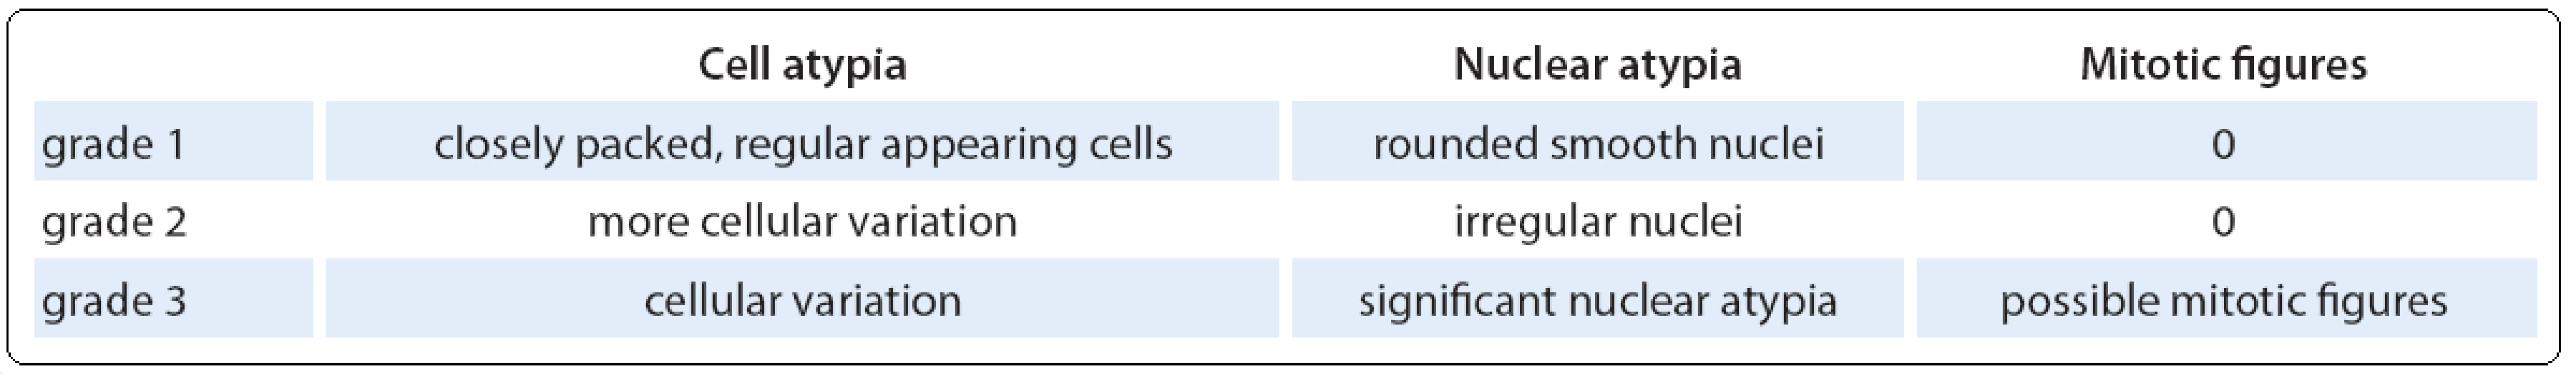 Grading system of renal cell oncocytomas [16].